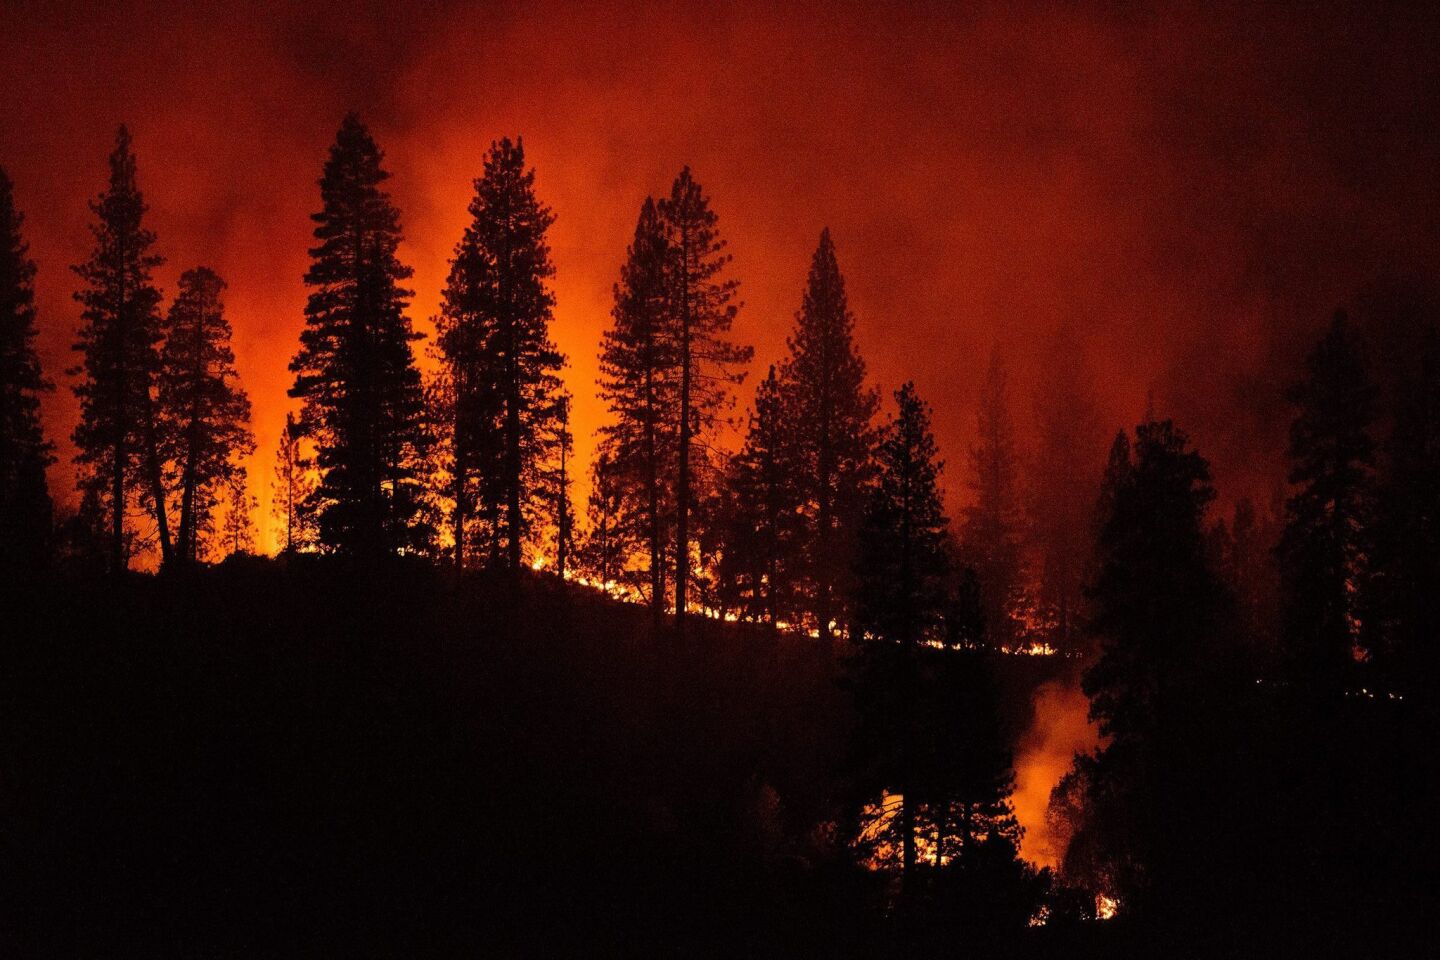 Firefighters set a controlled burn to rob fuel from the King fire near Pollock Pines, Calif.